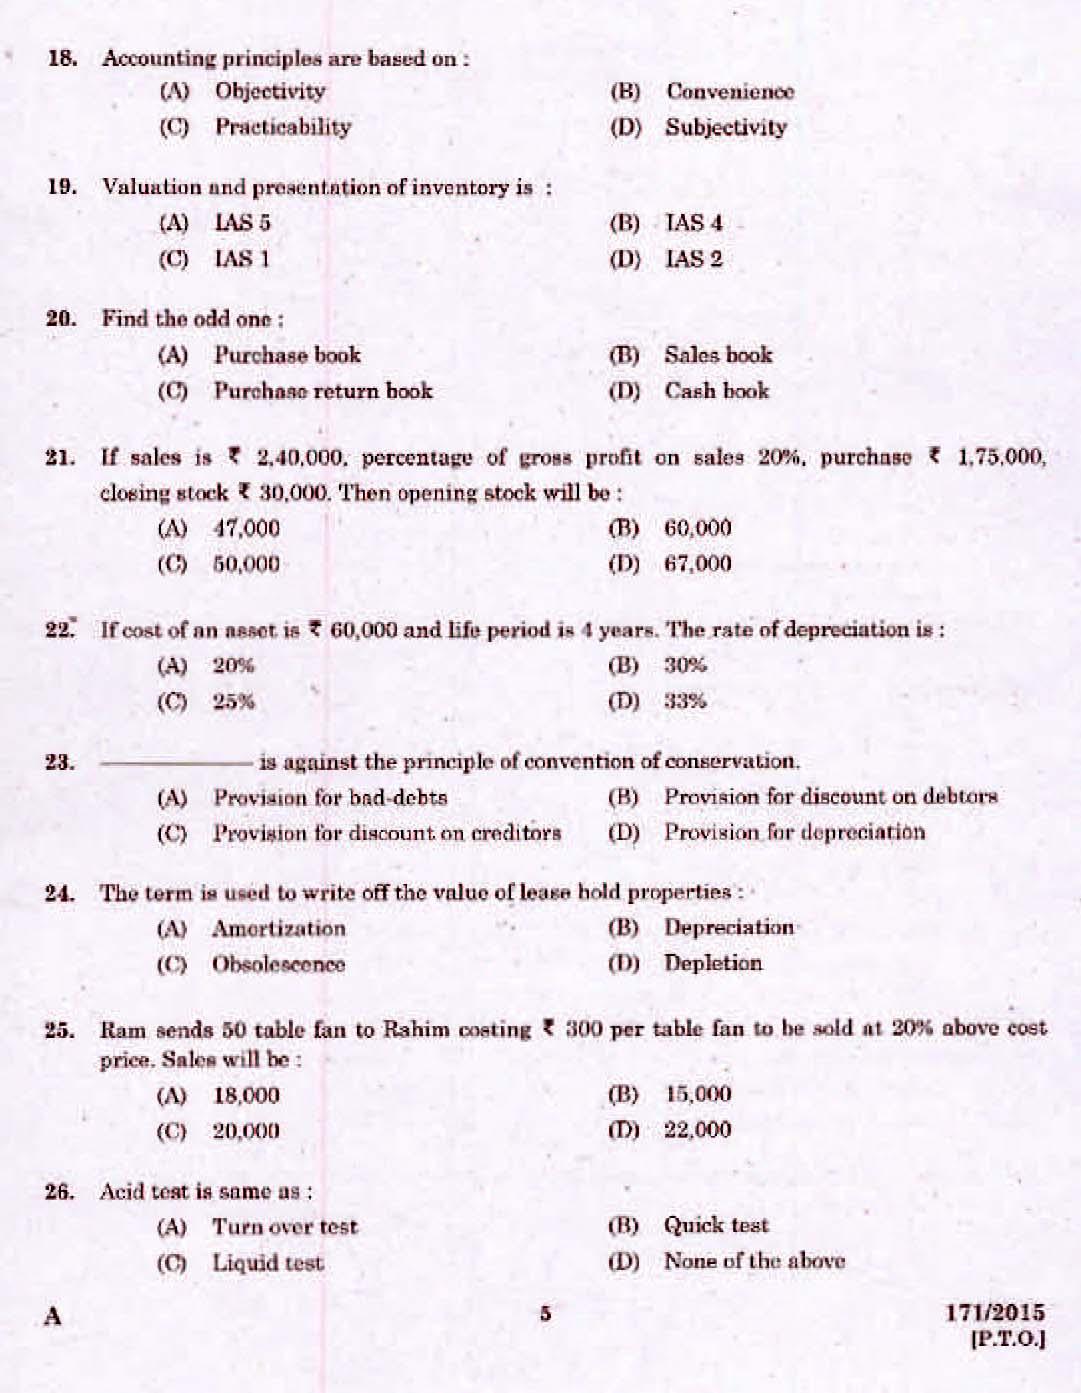 Kerala PSC Lower Division Accountant OMR Exam 2015 Question Paper Code 1712015 3